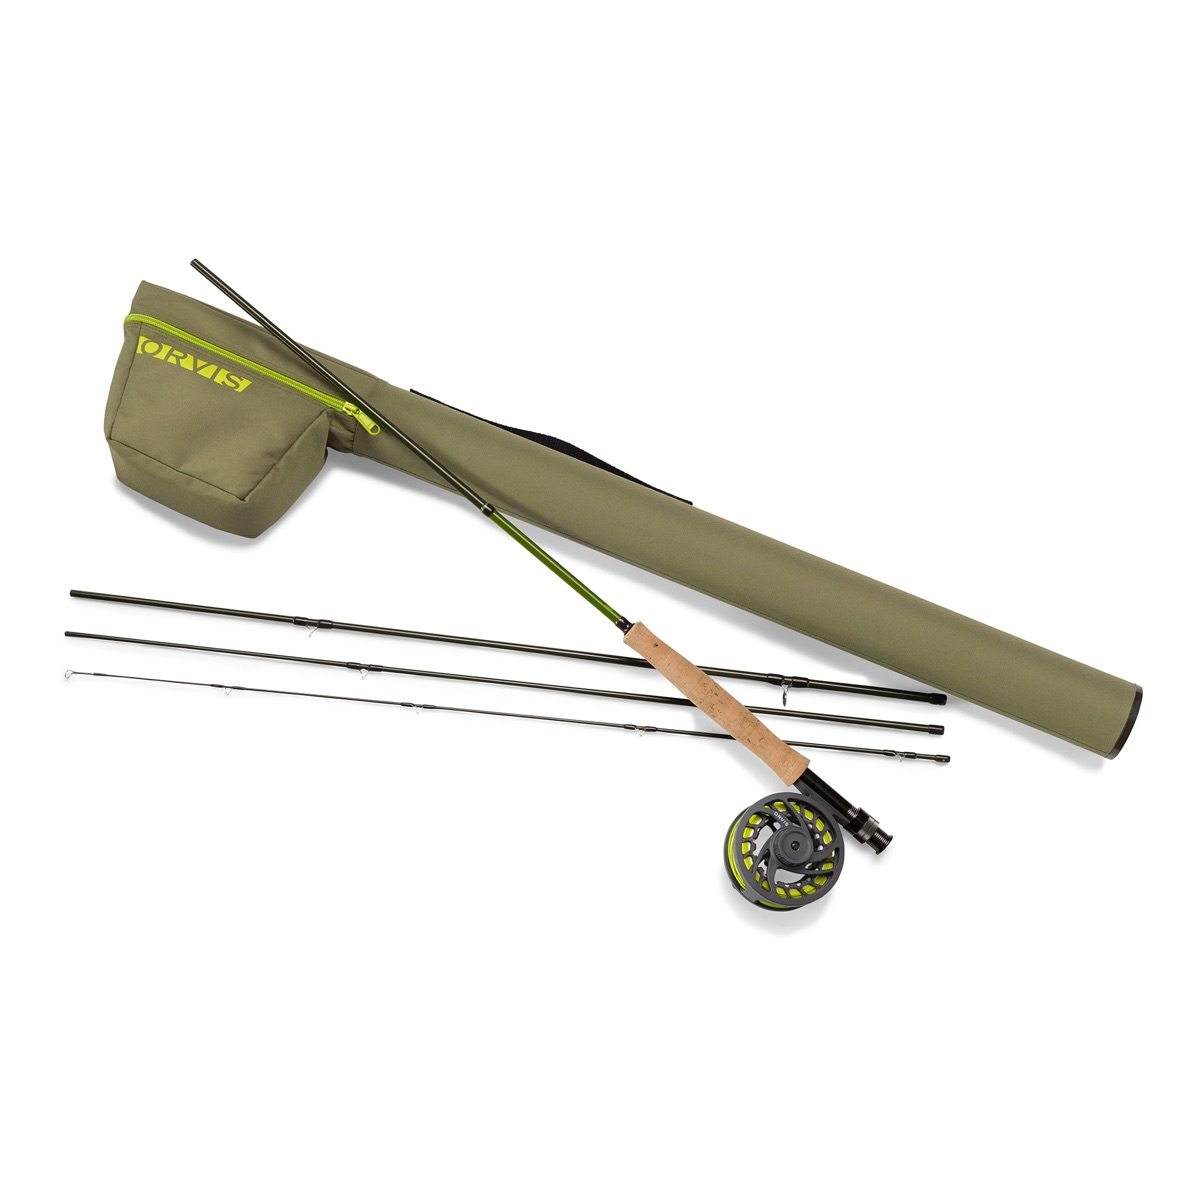 Orvis Encounter 906-4 Outfit Green